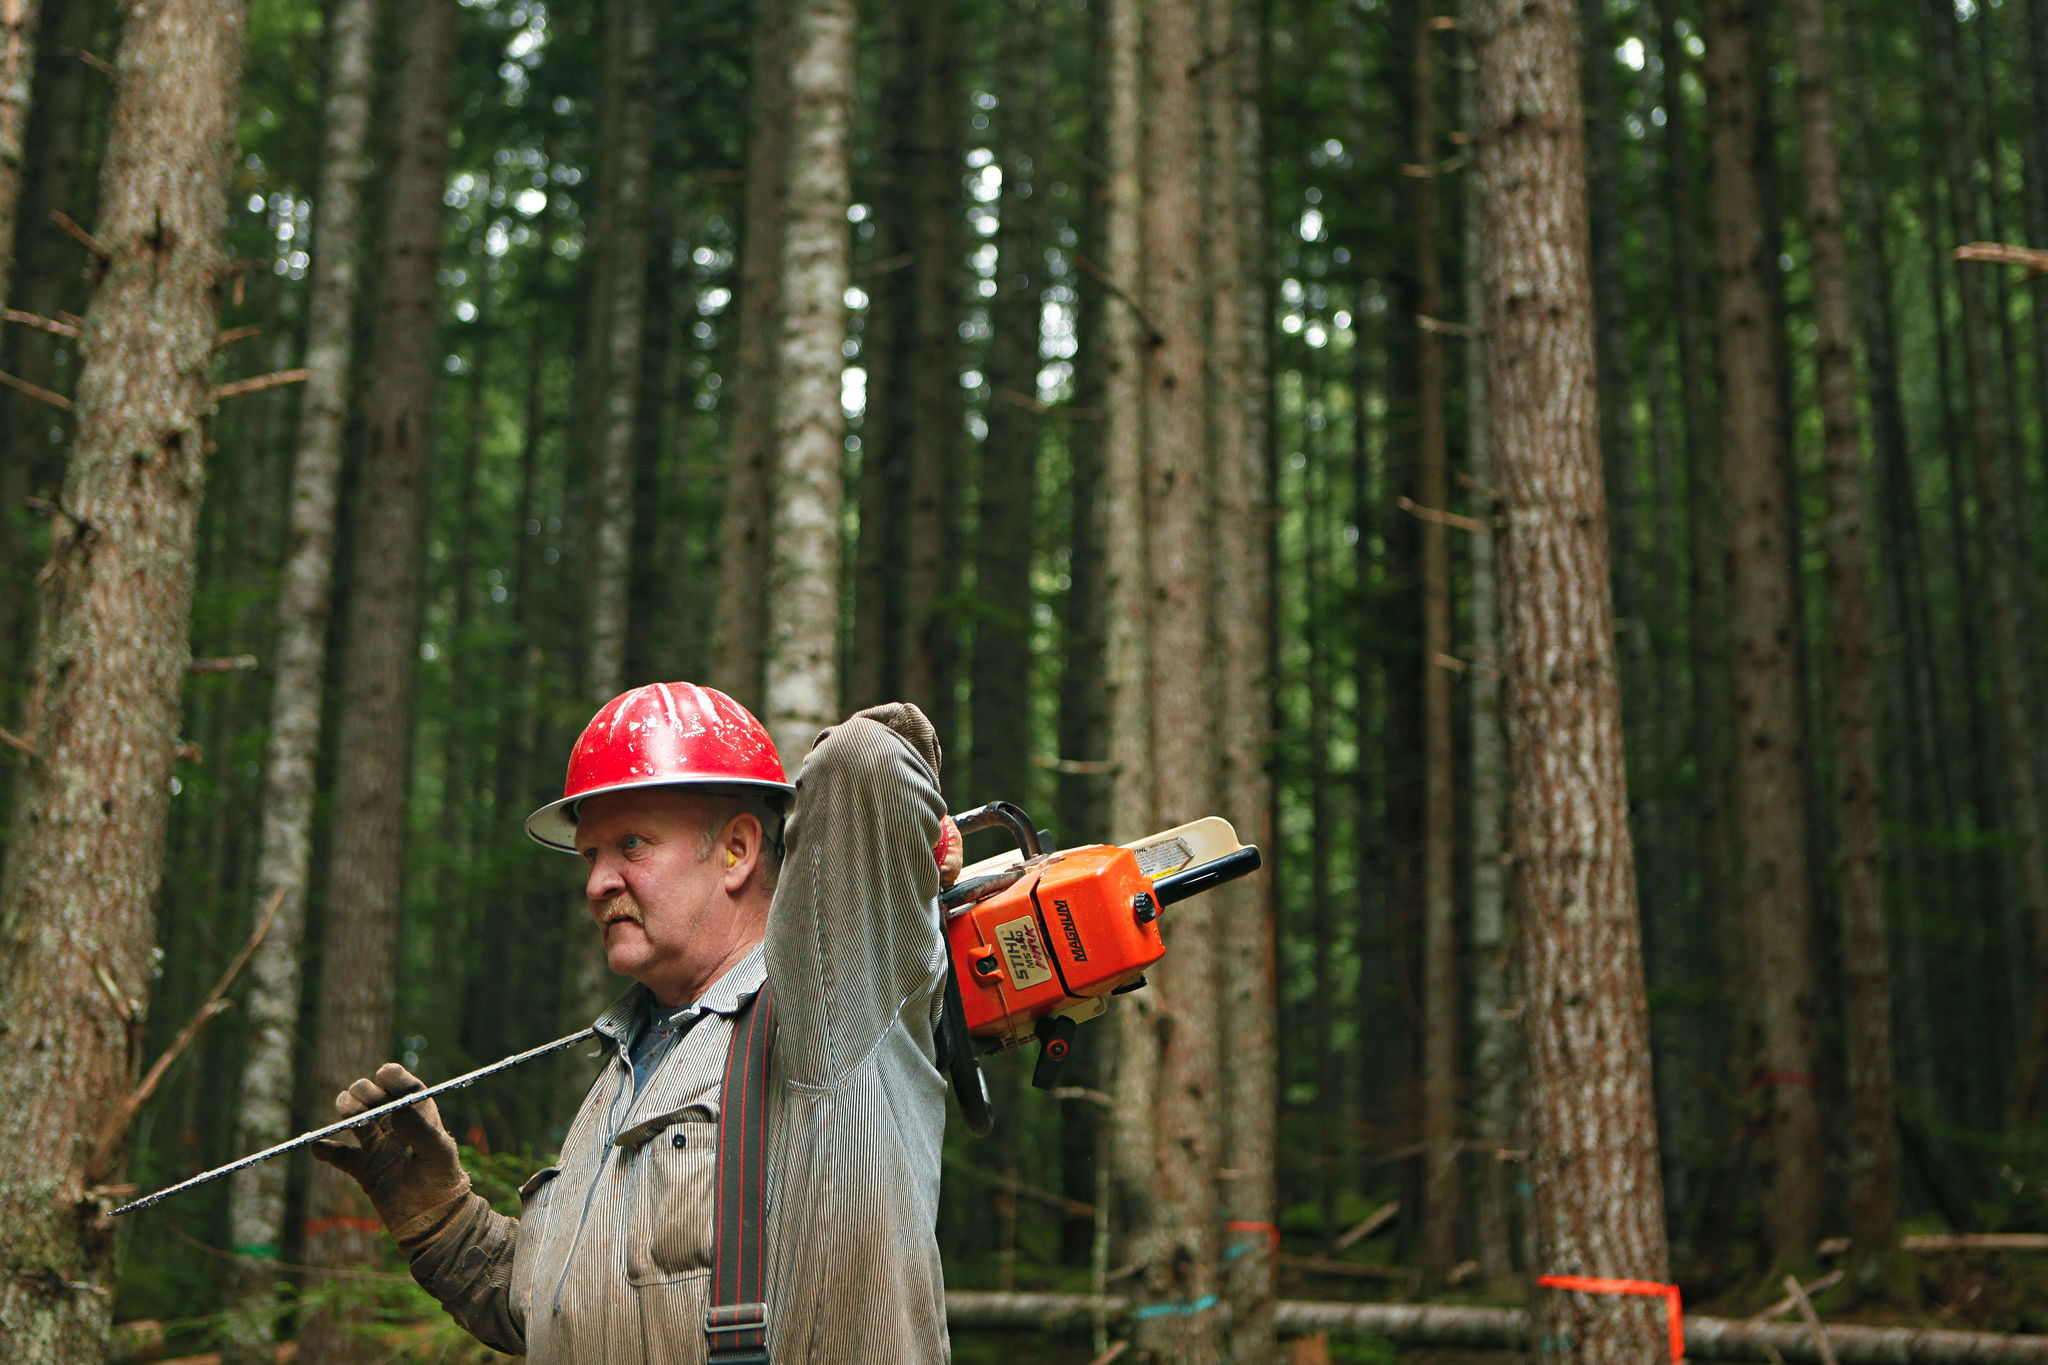 A new study shows that one in 10 jobs are tied to forestry, agriculture and fisheries in the five-state region of Washington, Oregon, Alaska, Idaho and Montana.